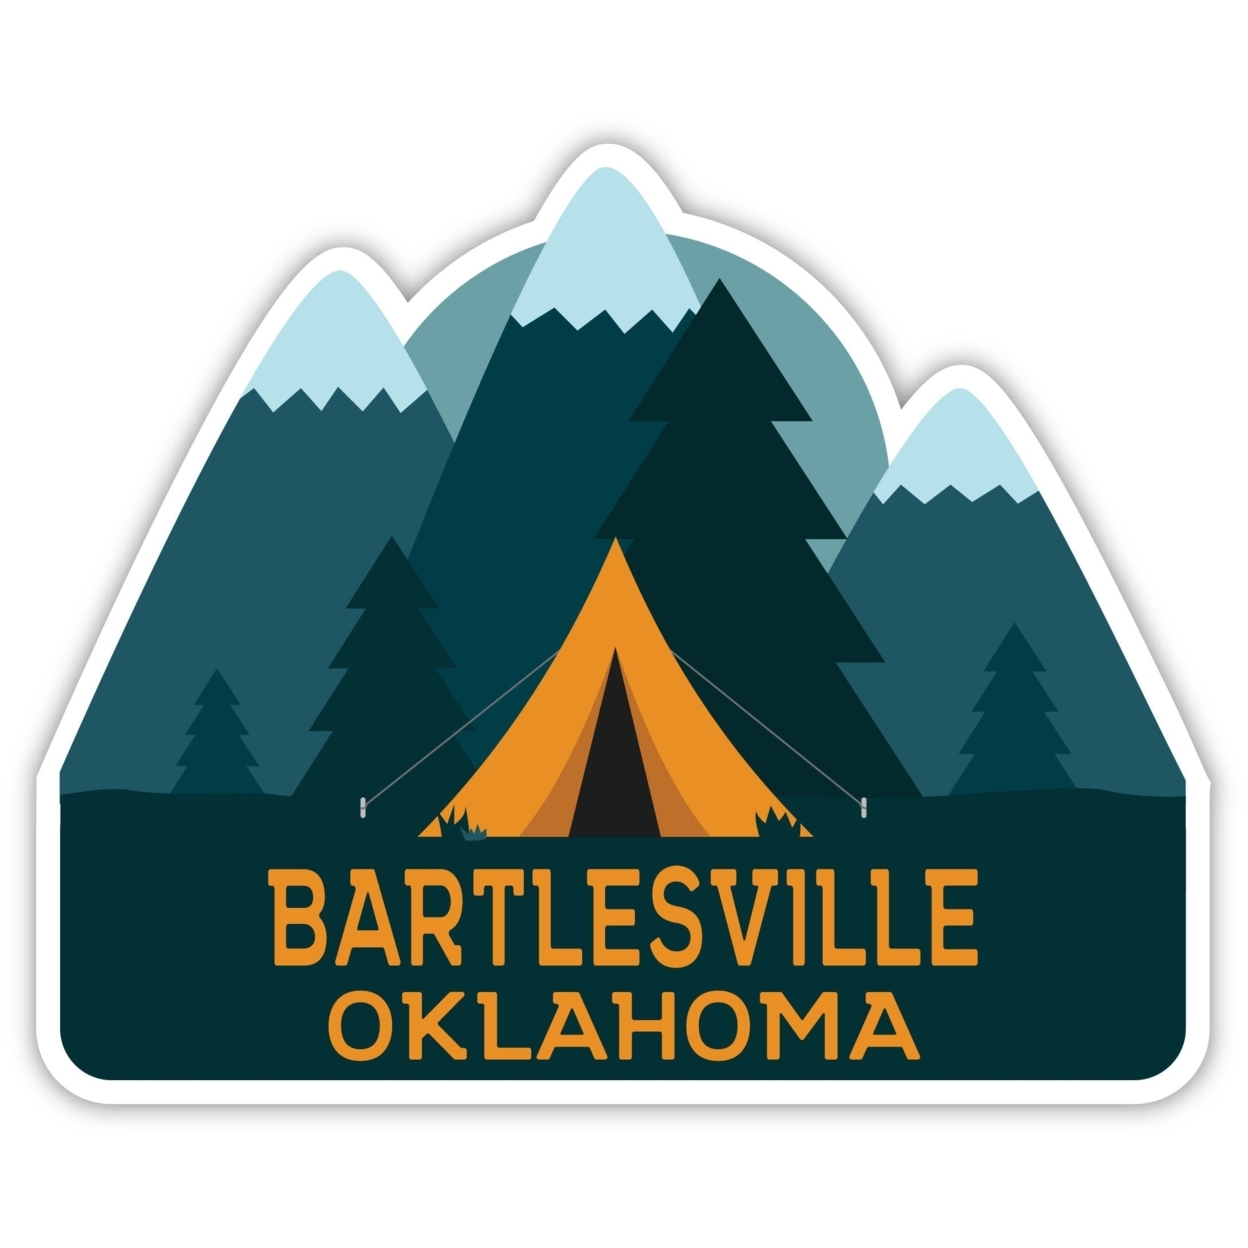 Bartlesville Oklahoma Souvenir Decorative Stickers (Choose Theme And Size) - 4-Pack, 2-Inch, Tent